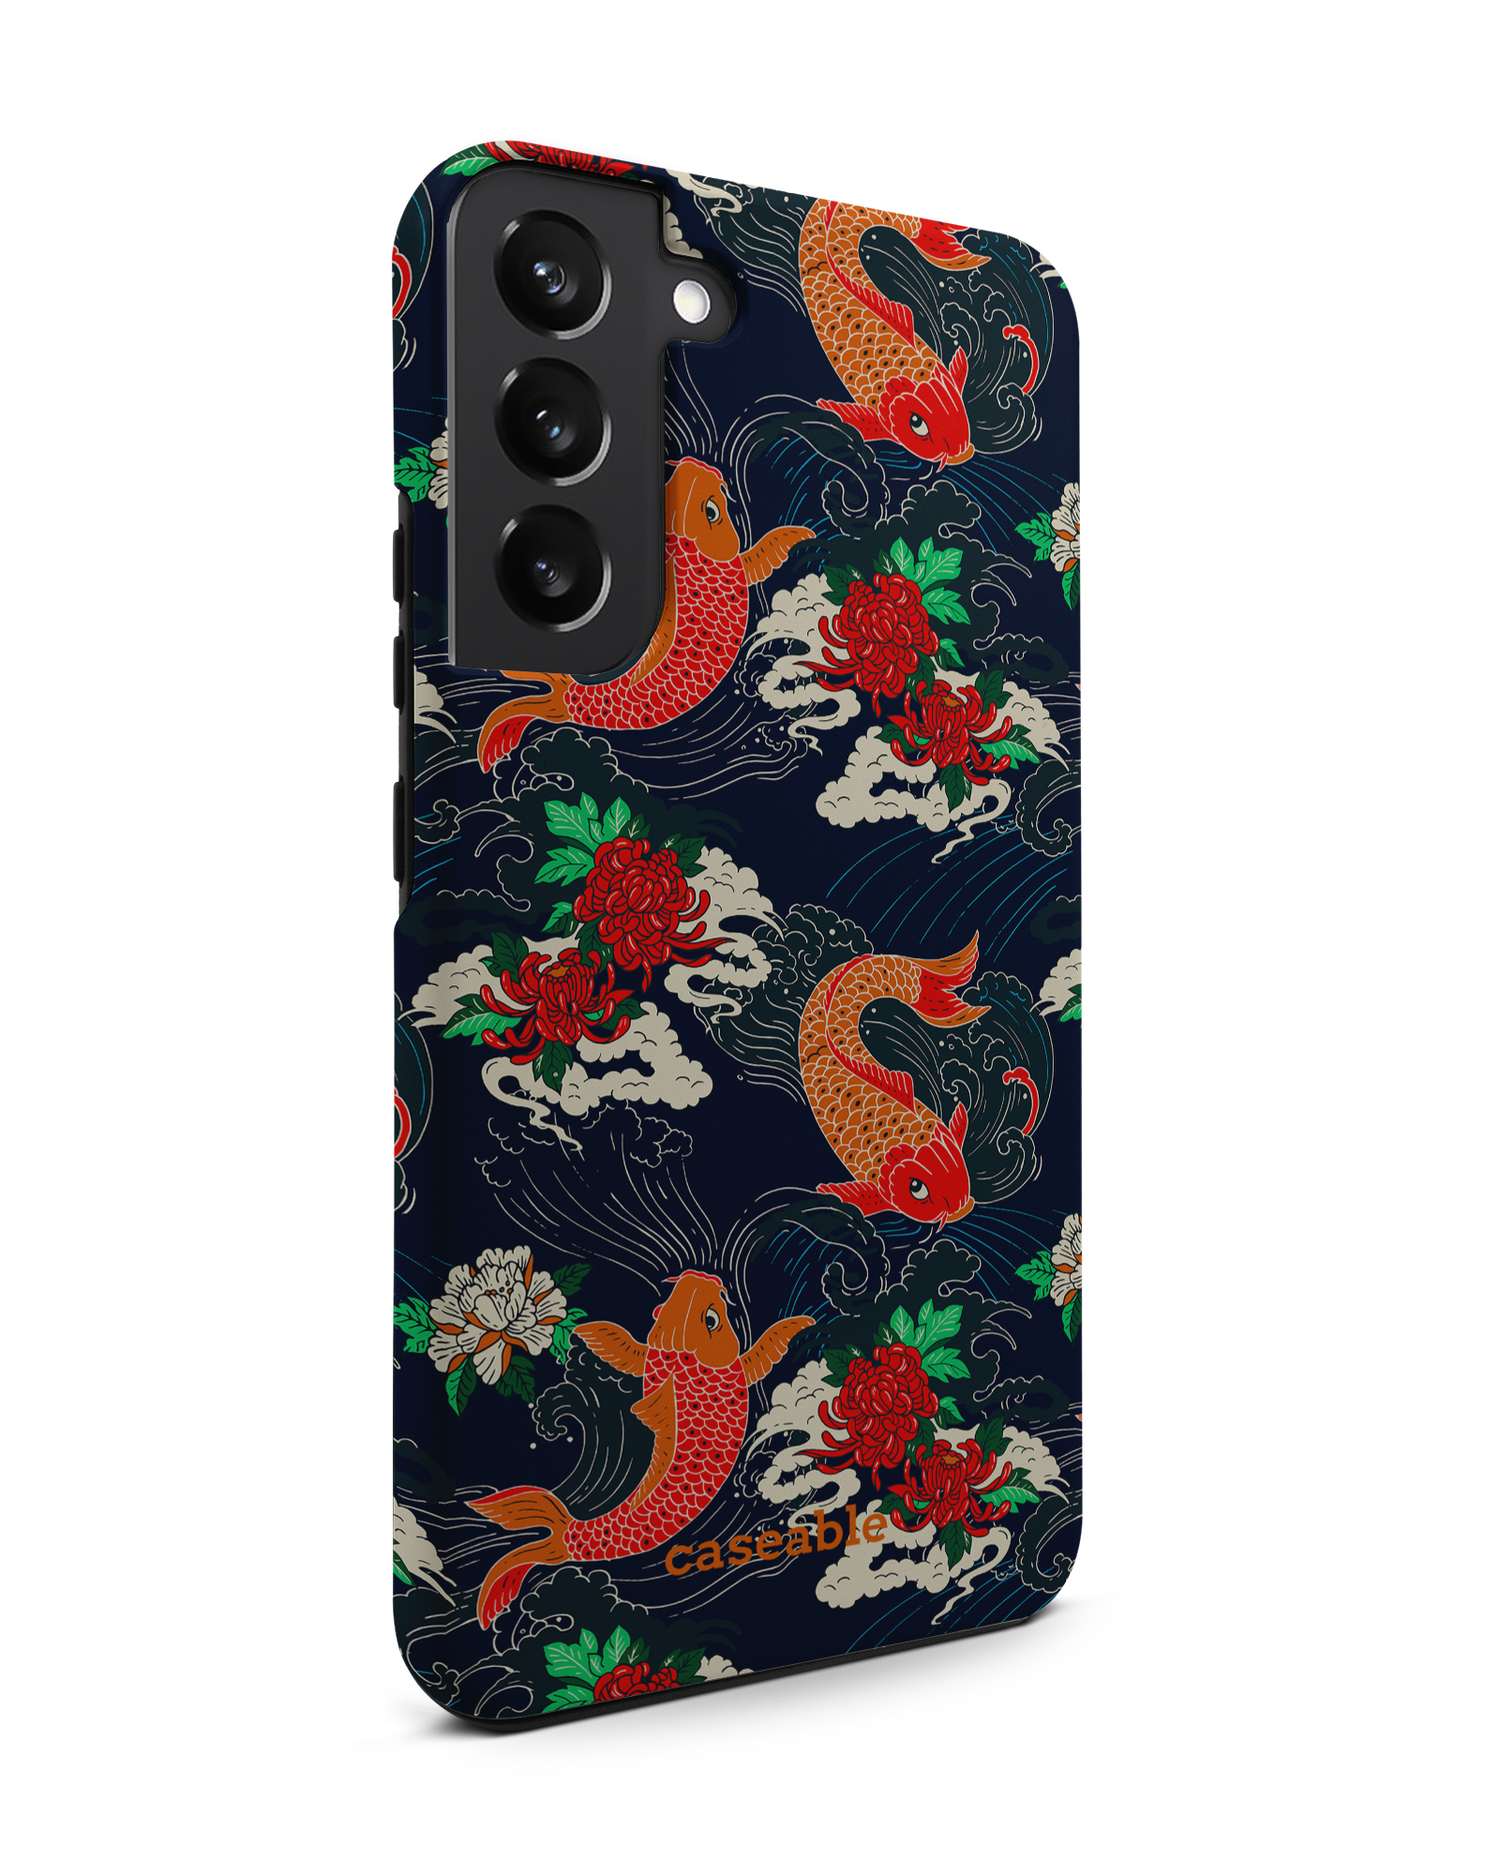 Repeating Koi Premium Phone Case Samsung Galaxy S22 Plus 5G: View from the left side